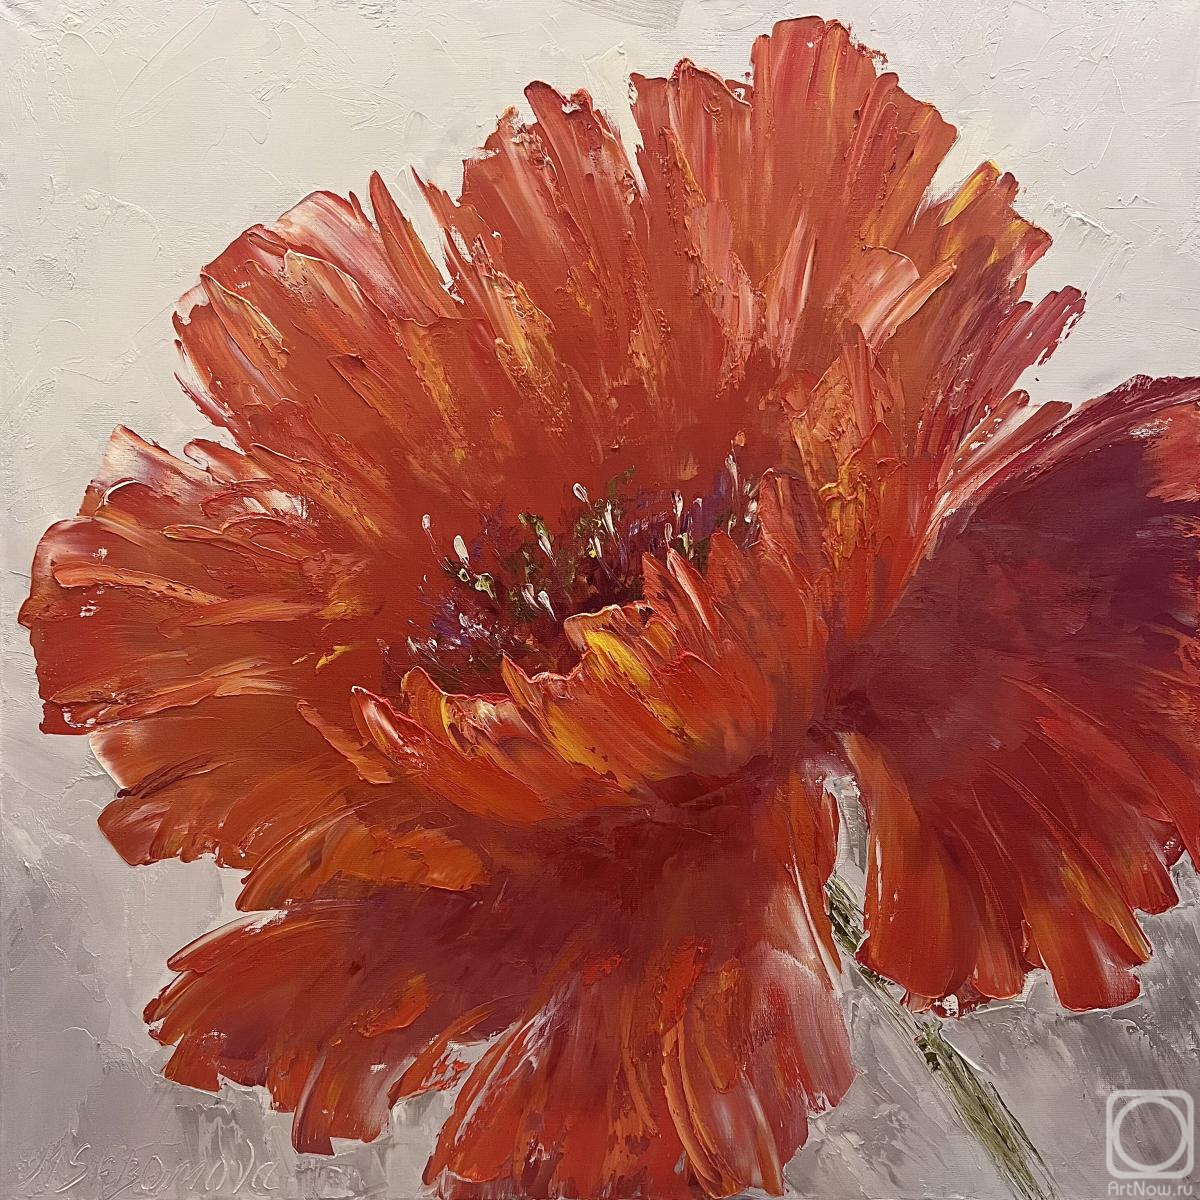 Skromova Marina. Oil painting with red poppy